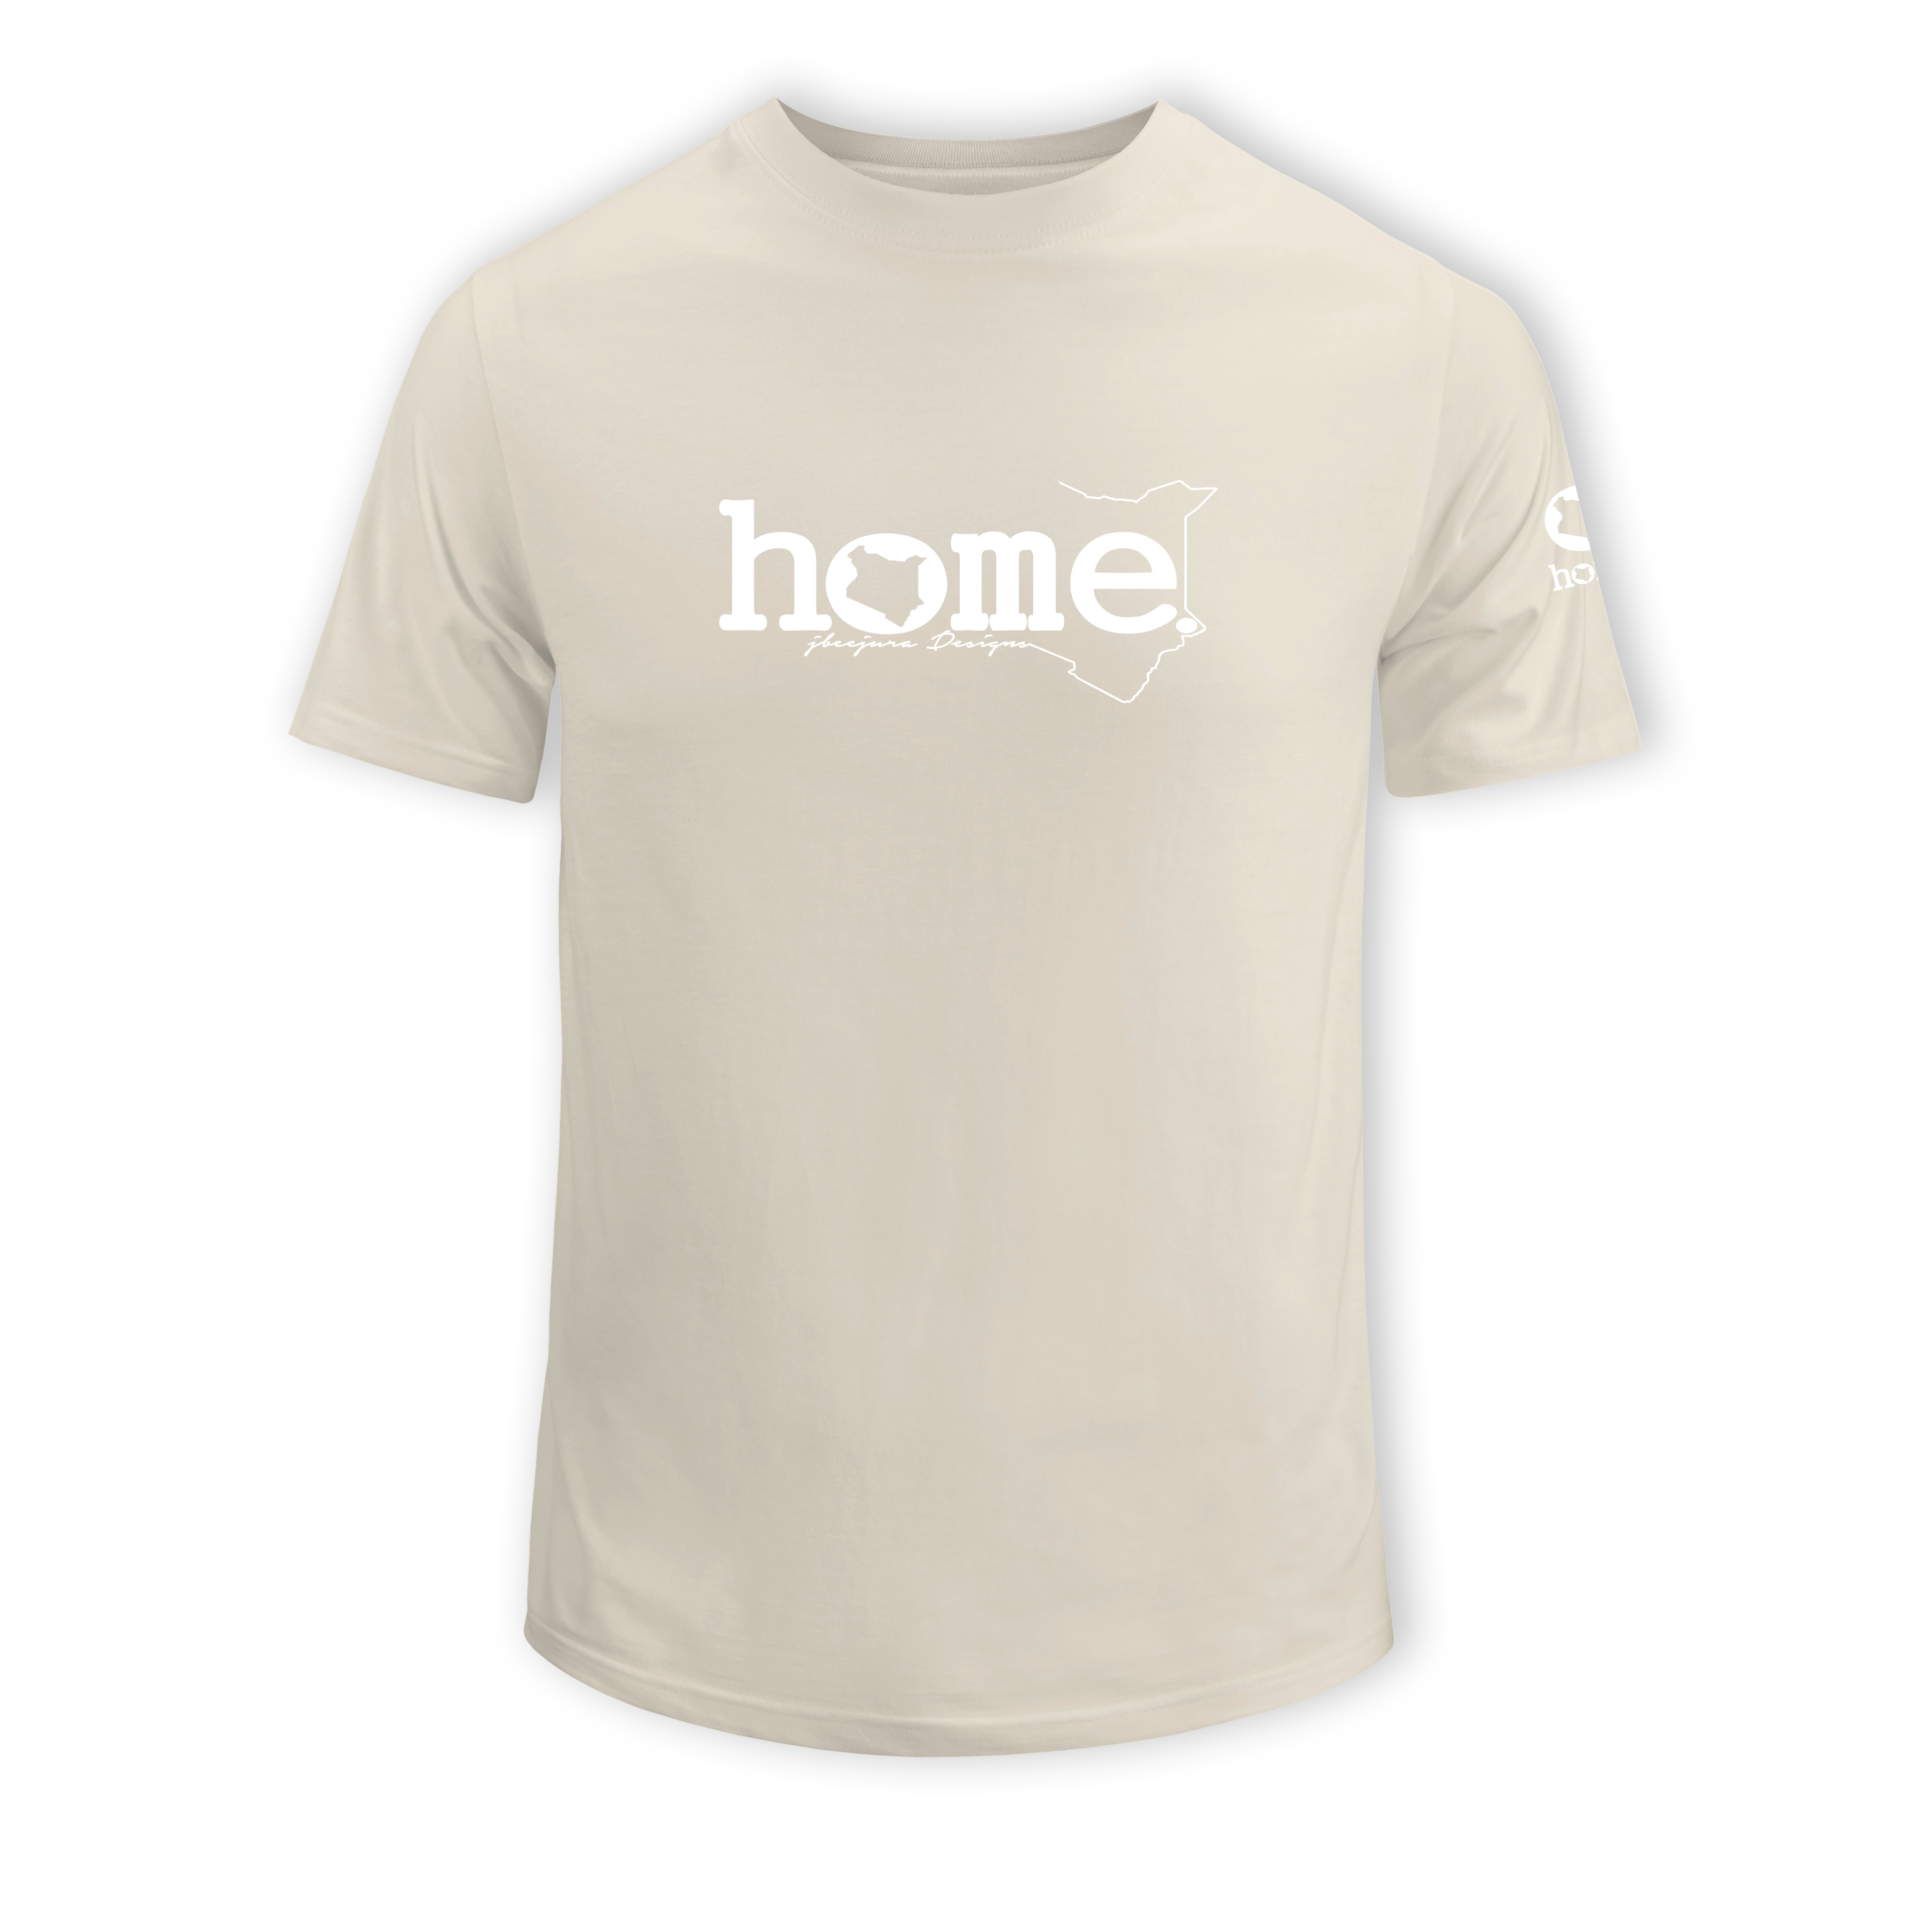 home_254 SHORT-SLEEVED NUDE T-SHIRT WITH A WHITE CLASSIC WORDS PRINT – COTTON PLUS FABRIC